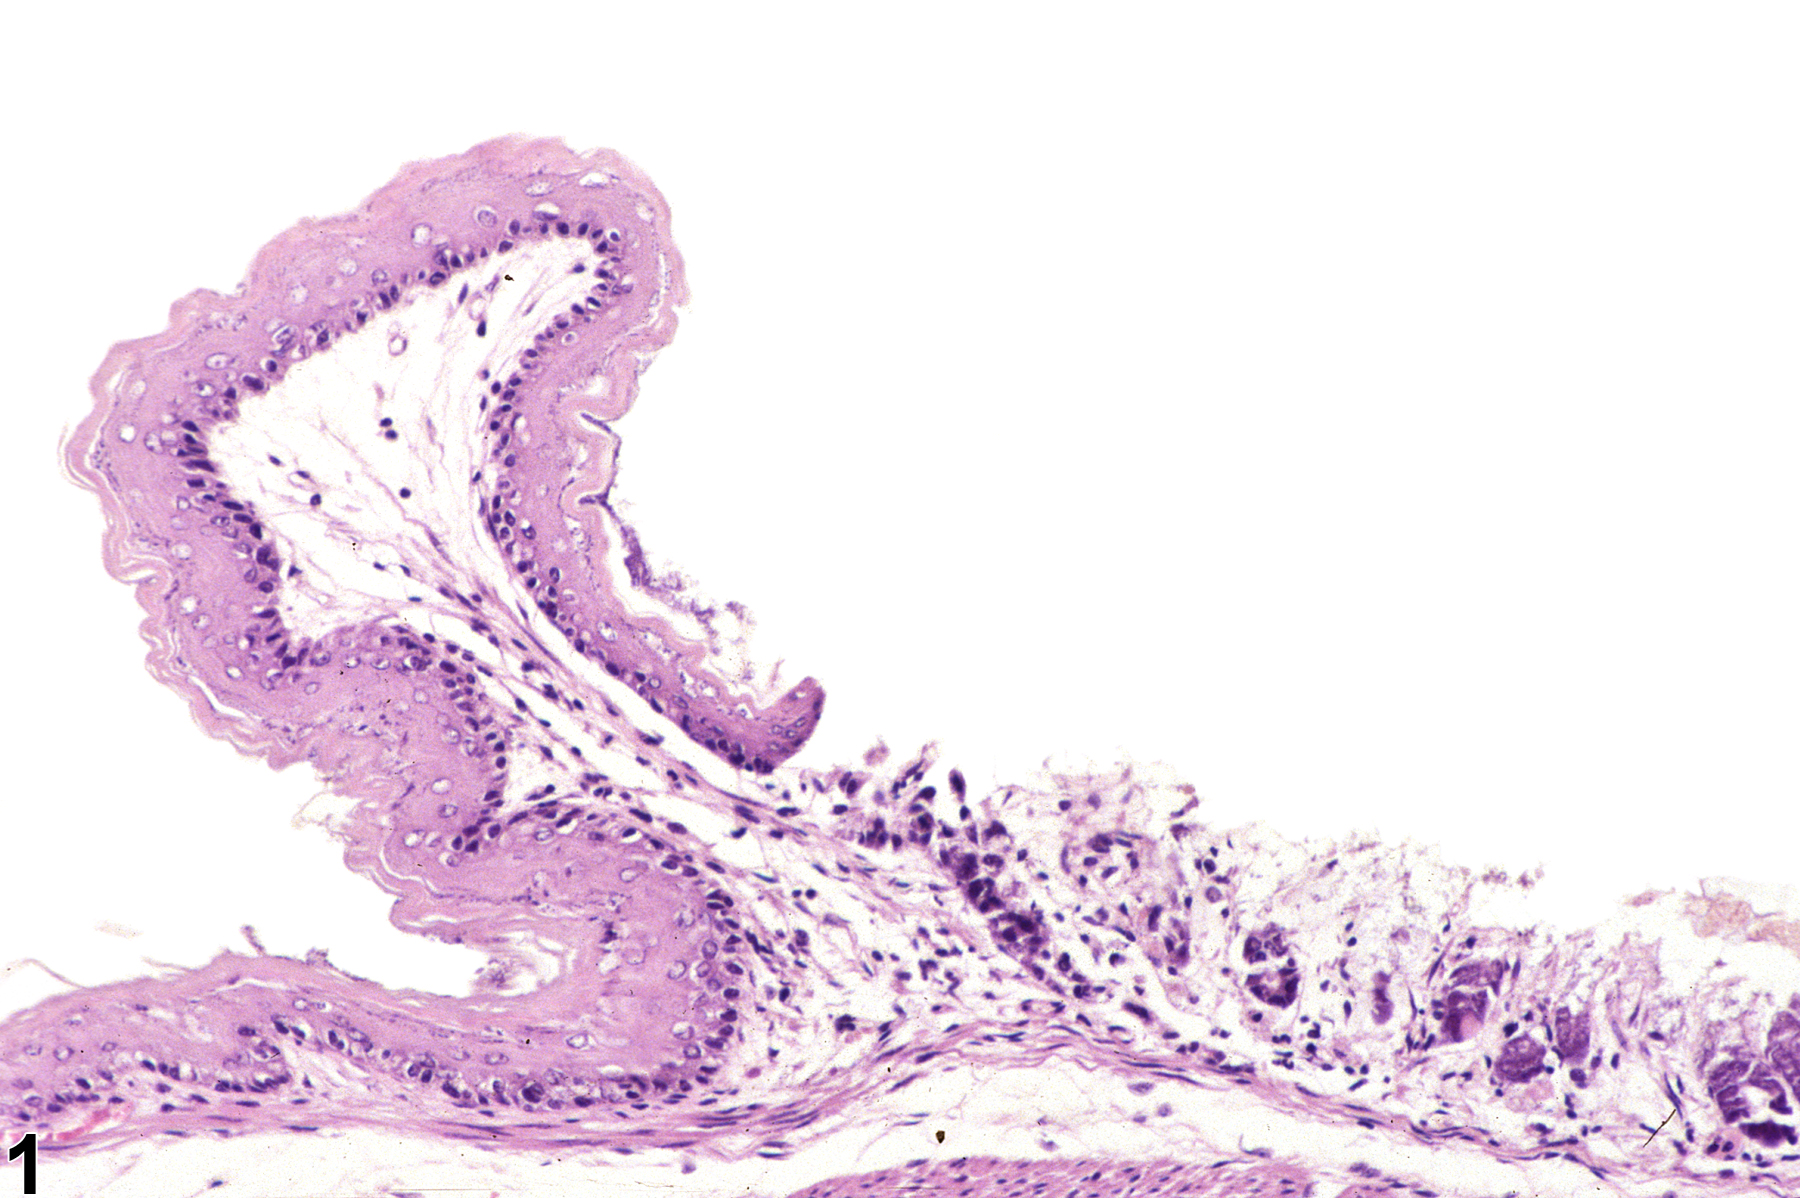 Image of necrosis in the glandular stomach from a female B6C3F1 mouse in a subchronic study